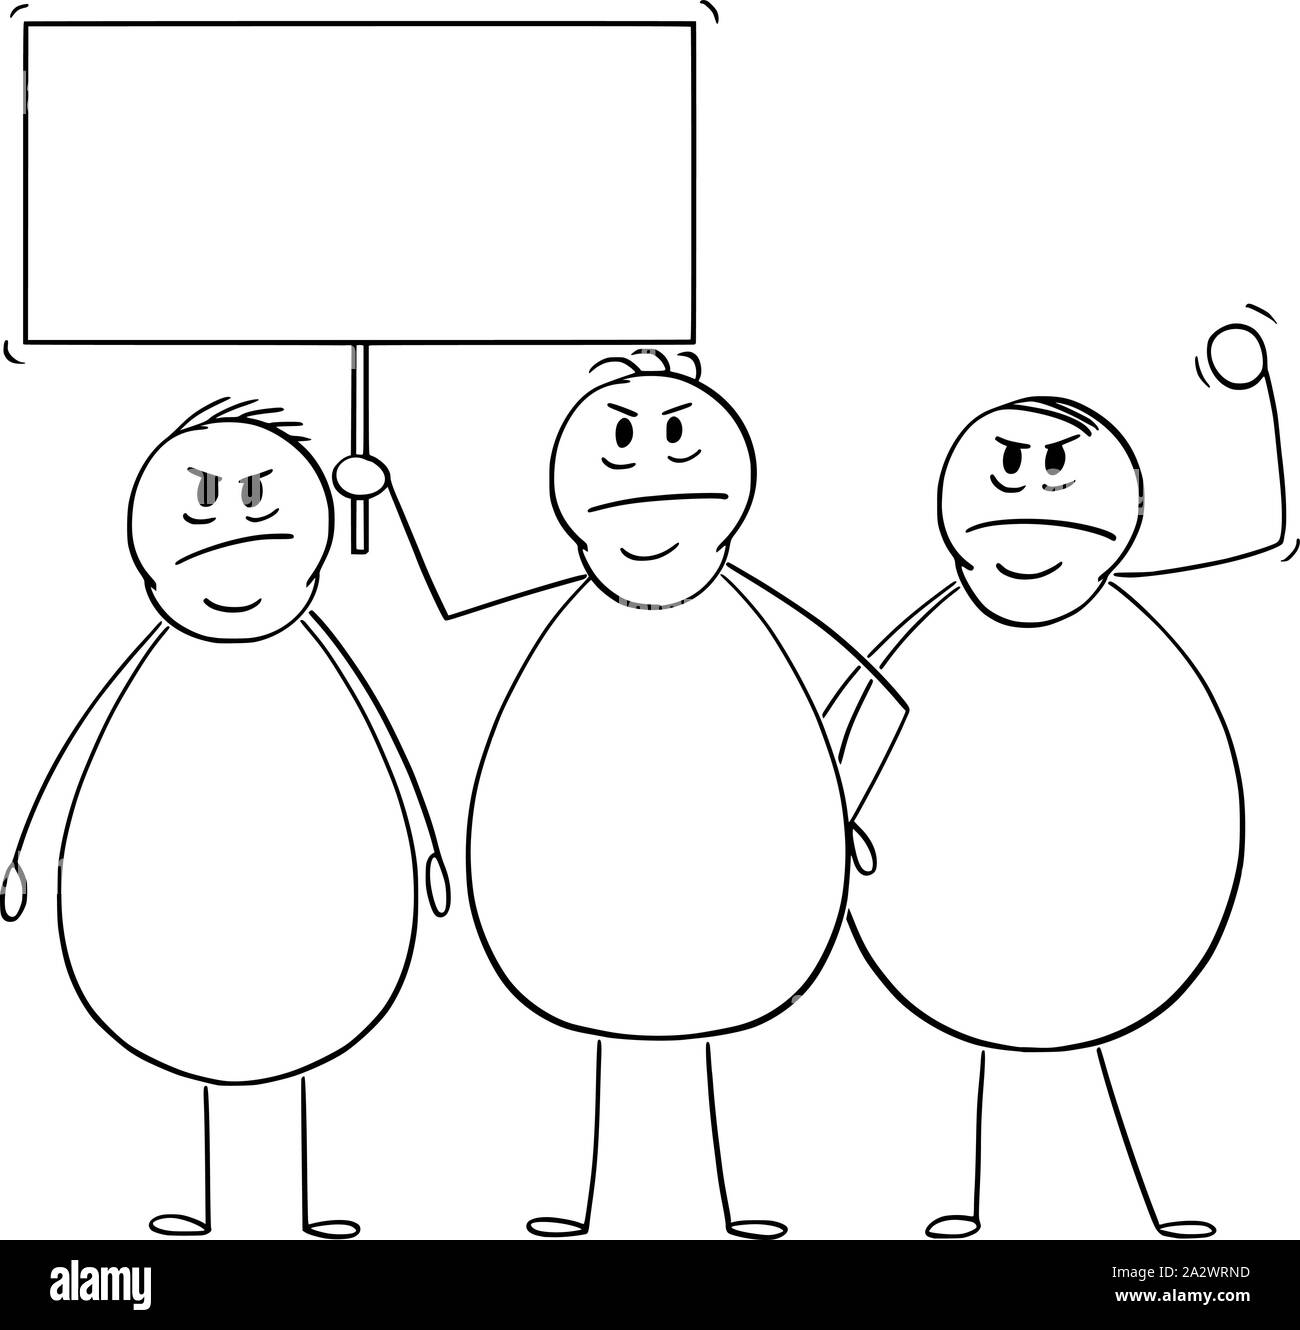 Vector cartoon stick figure drawing conceptual illustration of group of three angry overweight or fat men demonstrating or protesting with empty sign. Stock Vector